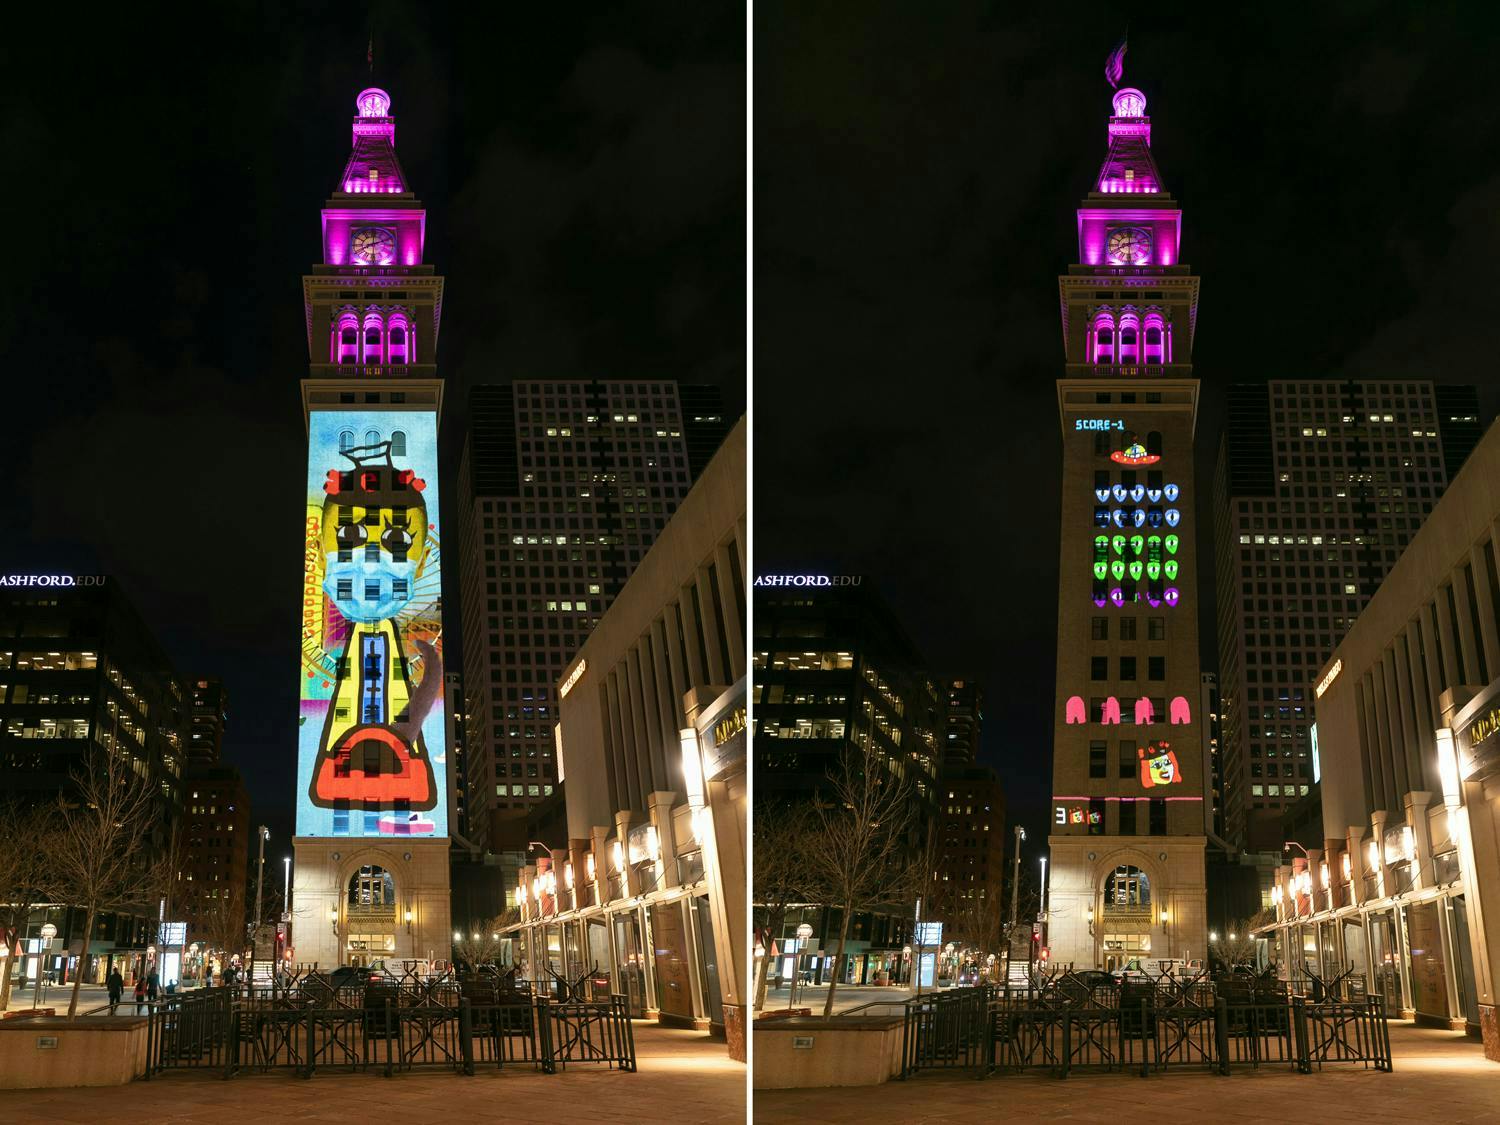 Jan Chan, Purring • HK-London, 2021, site-specific projection. Daniels & Fisher Tower, Denver, CO. Photo by Wes Magyar.